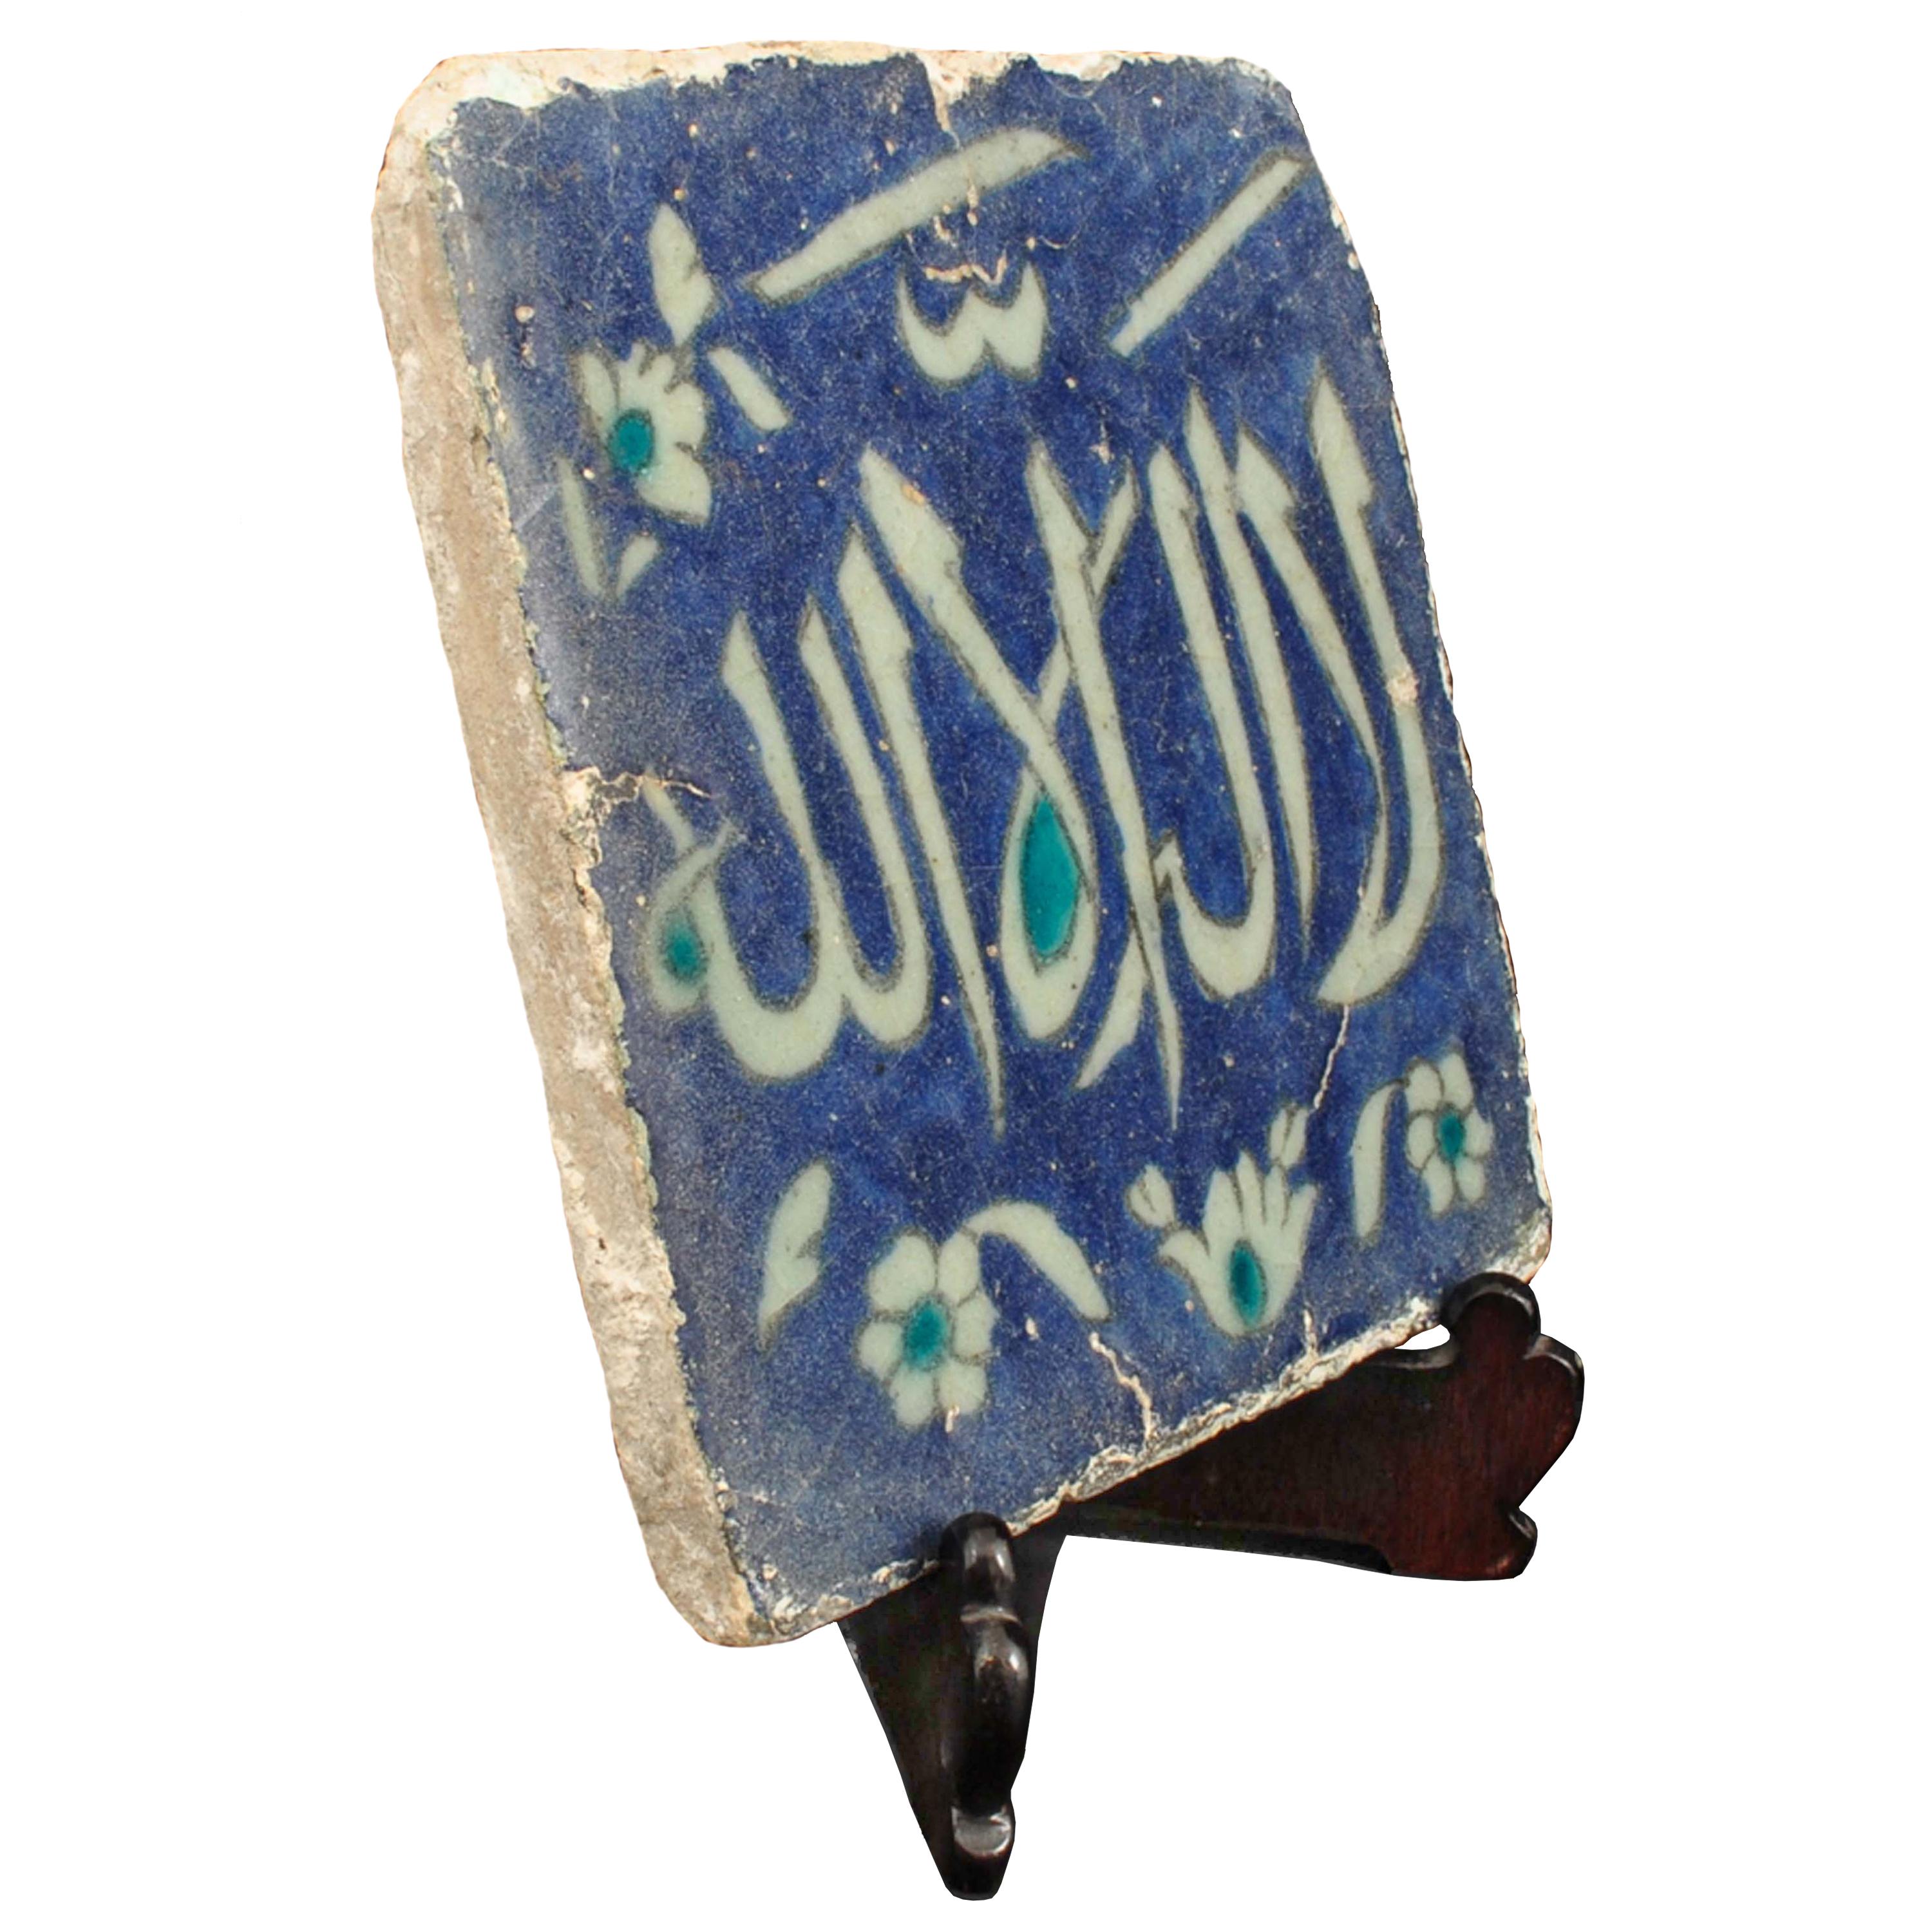 An important antique 16th century Ottoman calligraphic Iznik pottery tile, Turkey, circa 1580. 
The tile of rectangular form, painted in underglaze cobalt blue, outlined in black and decorated with a large white thuluth inscription reserved against